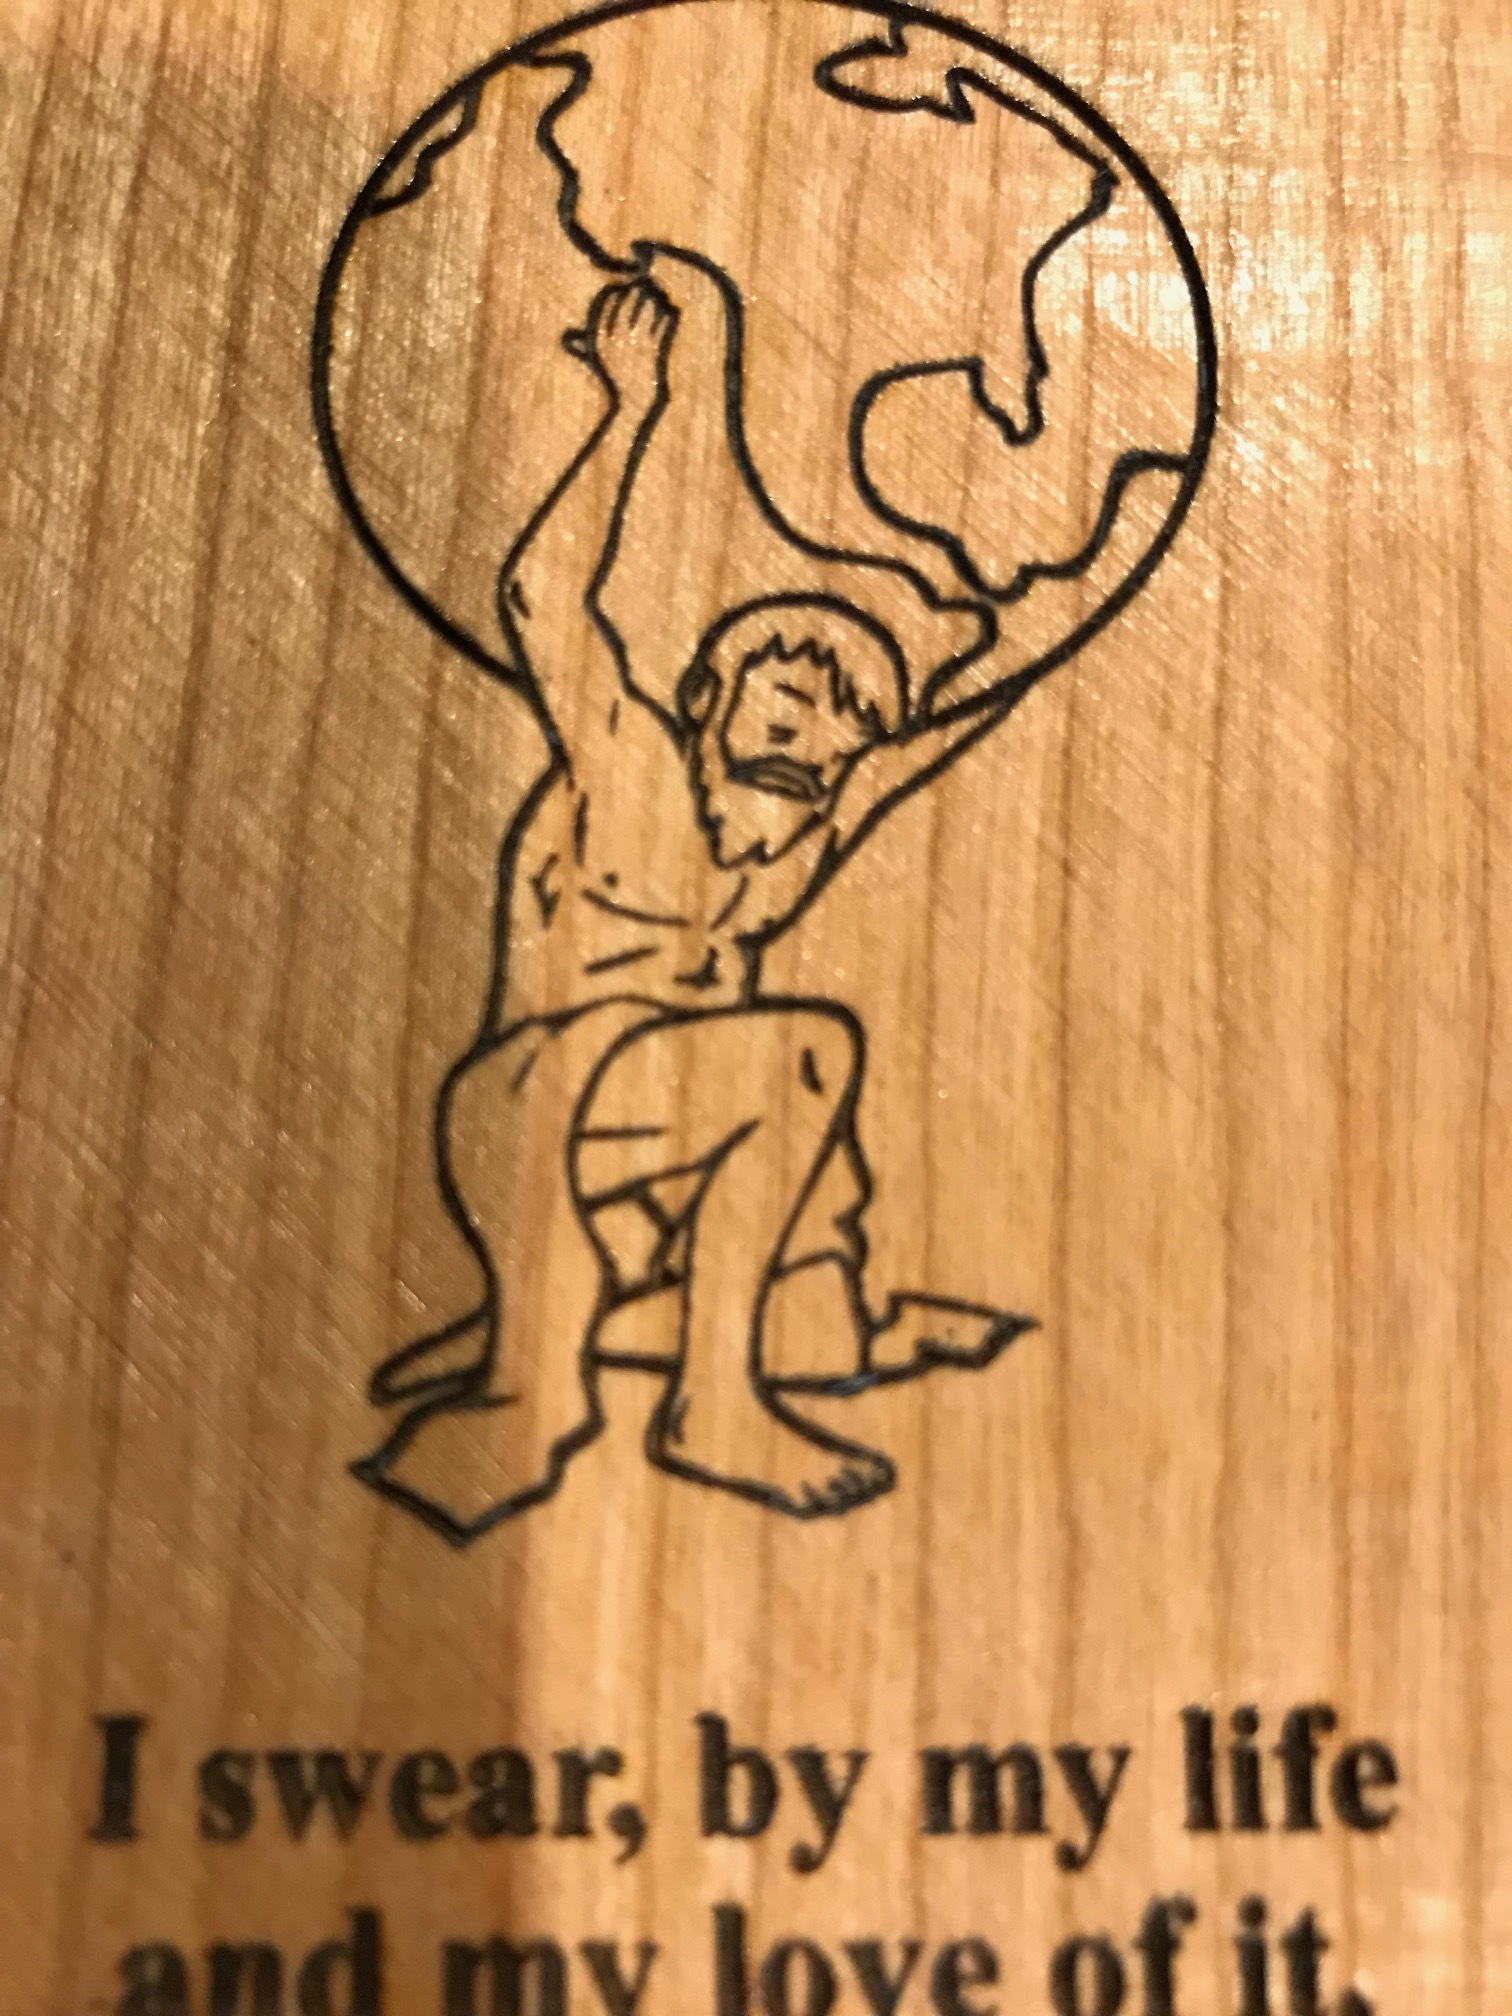 Filling in engraving on wood!